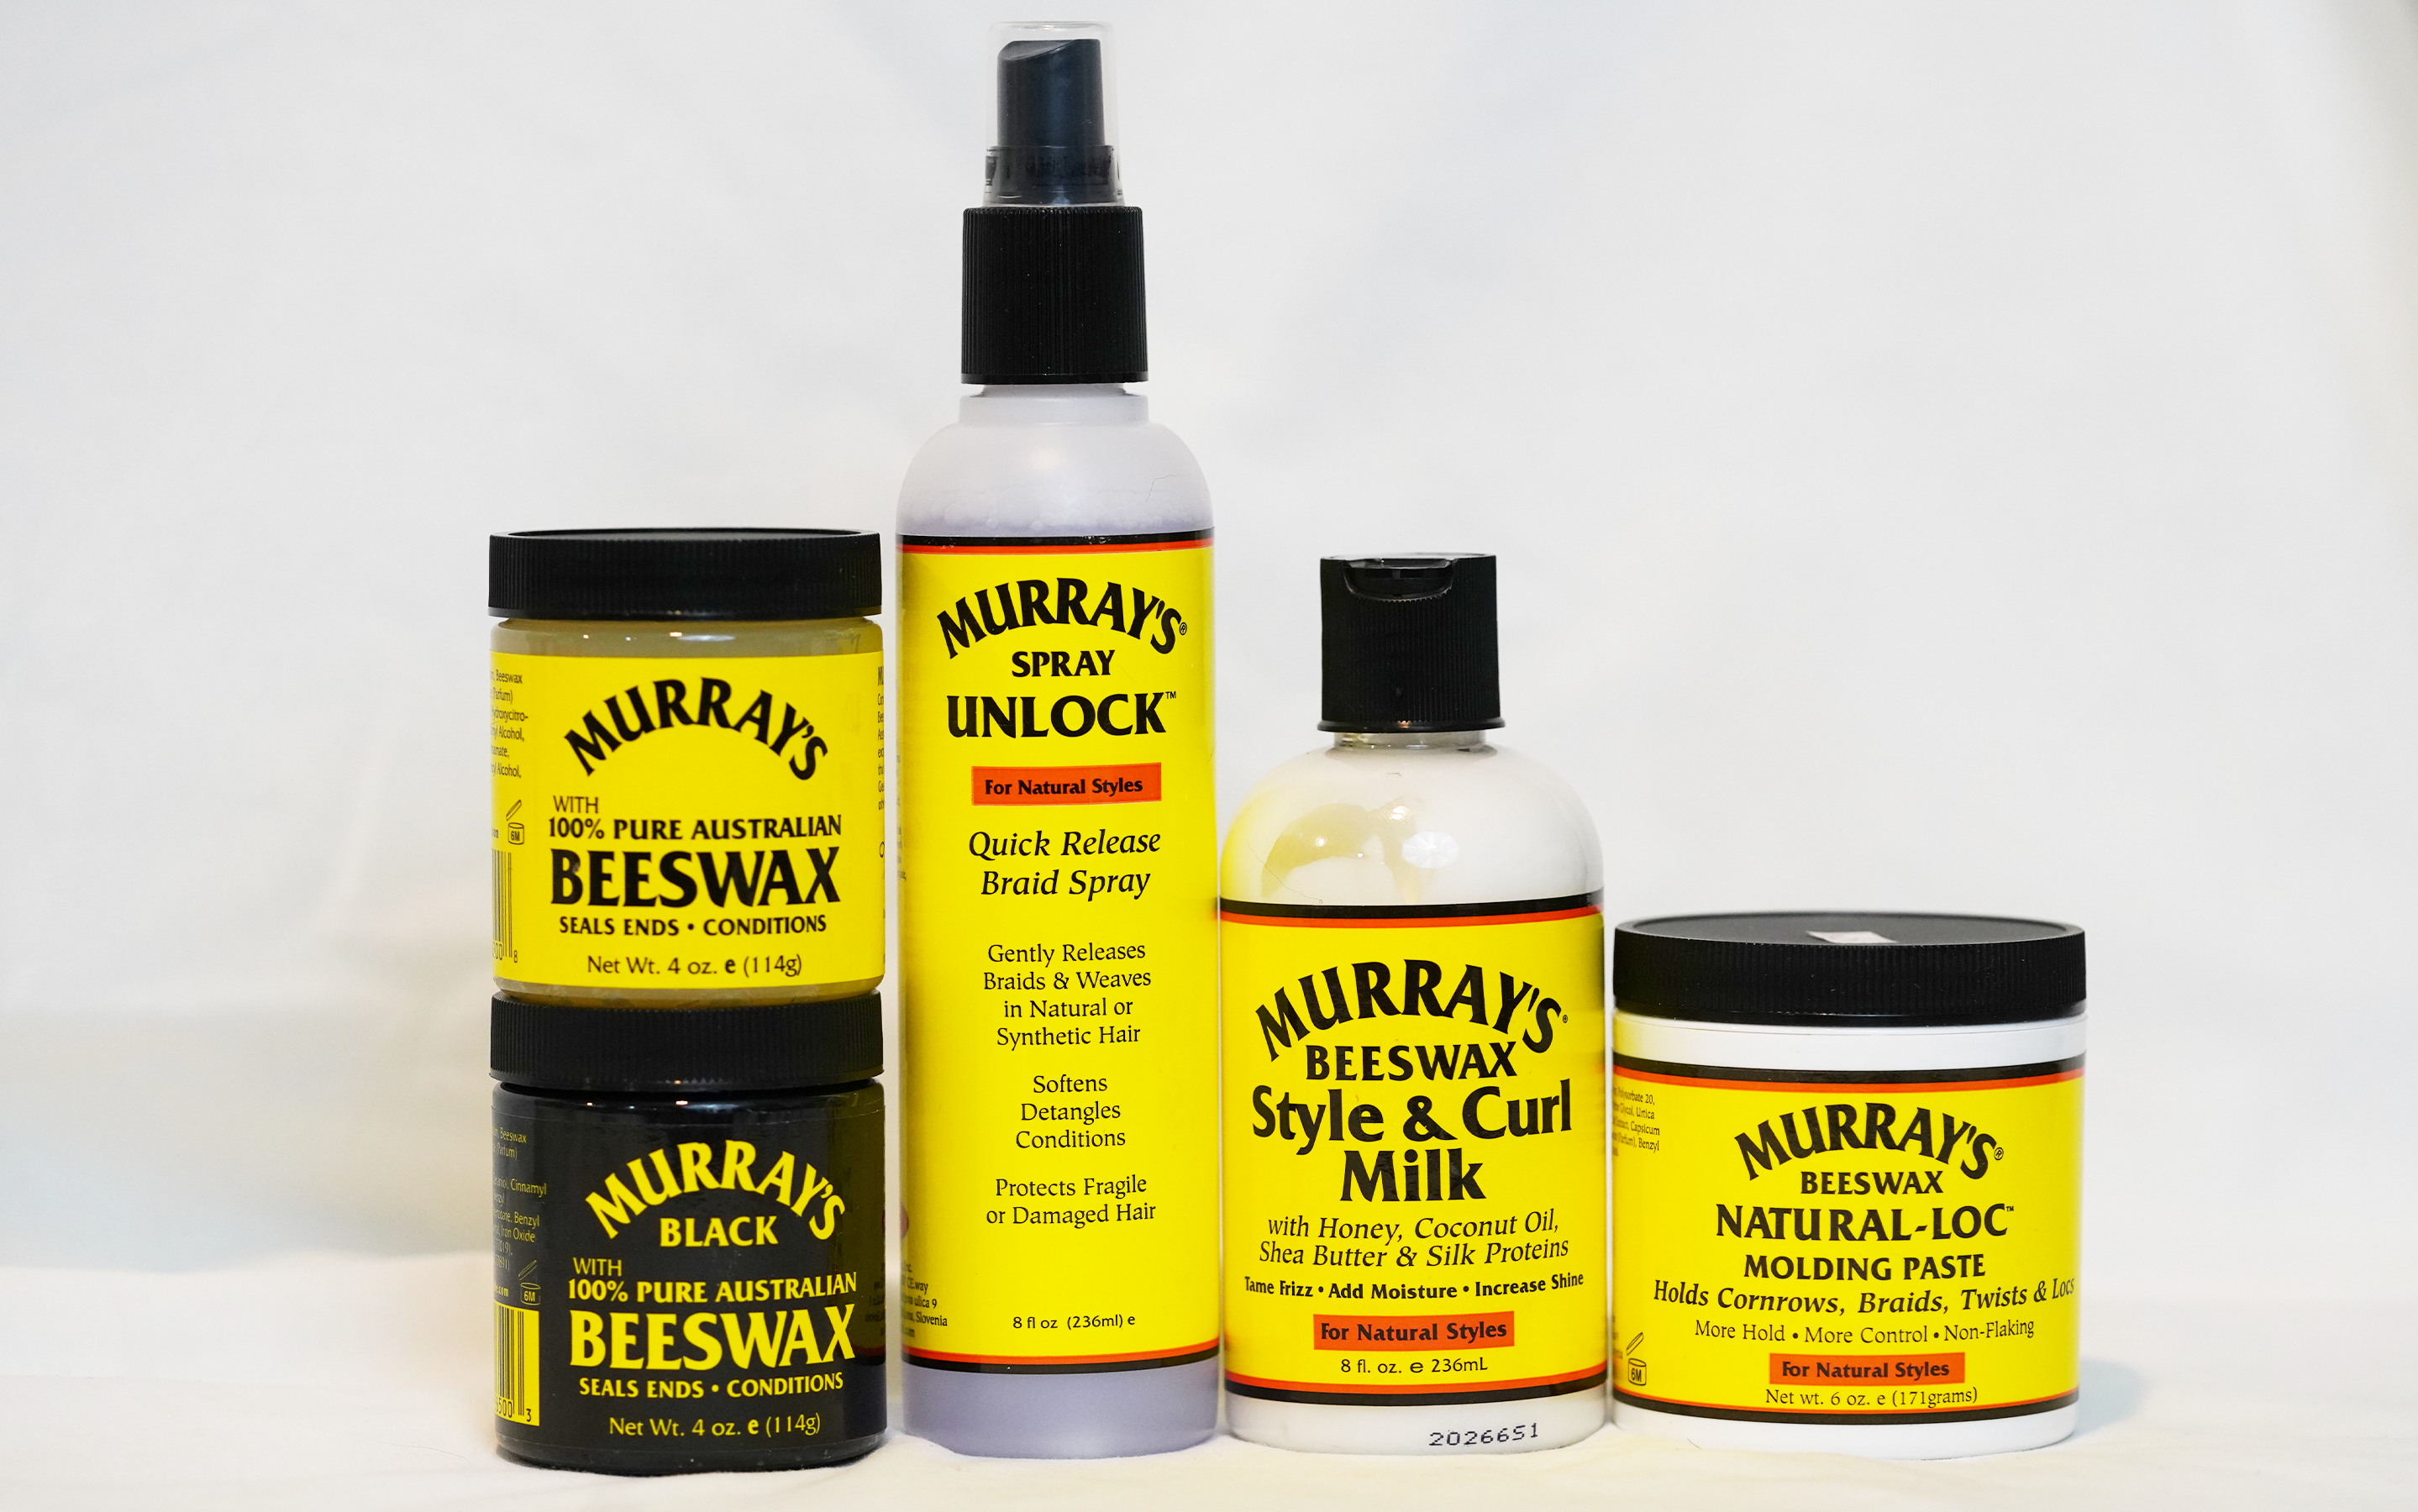 Murray's Black Beeswax - Hair Product Review 